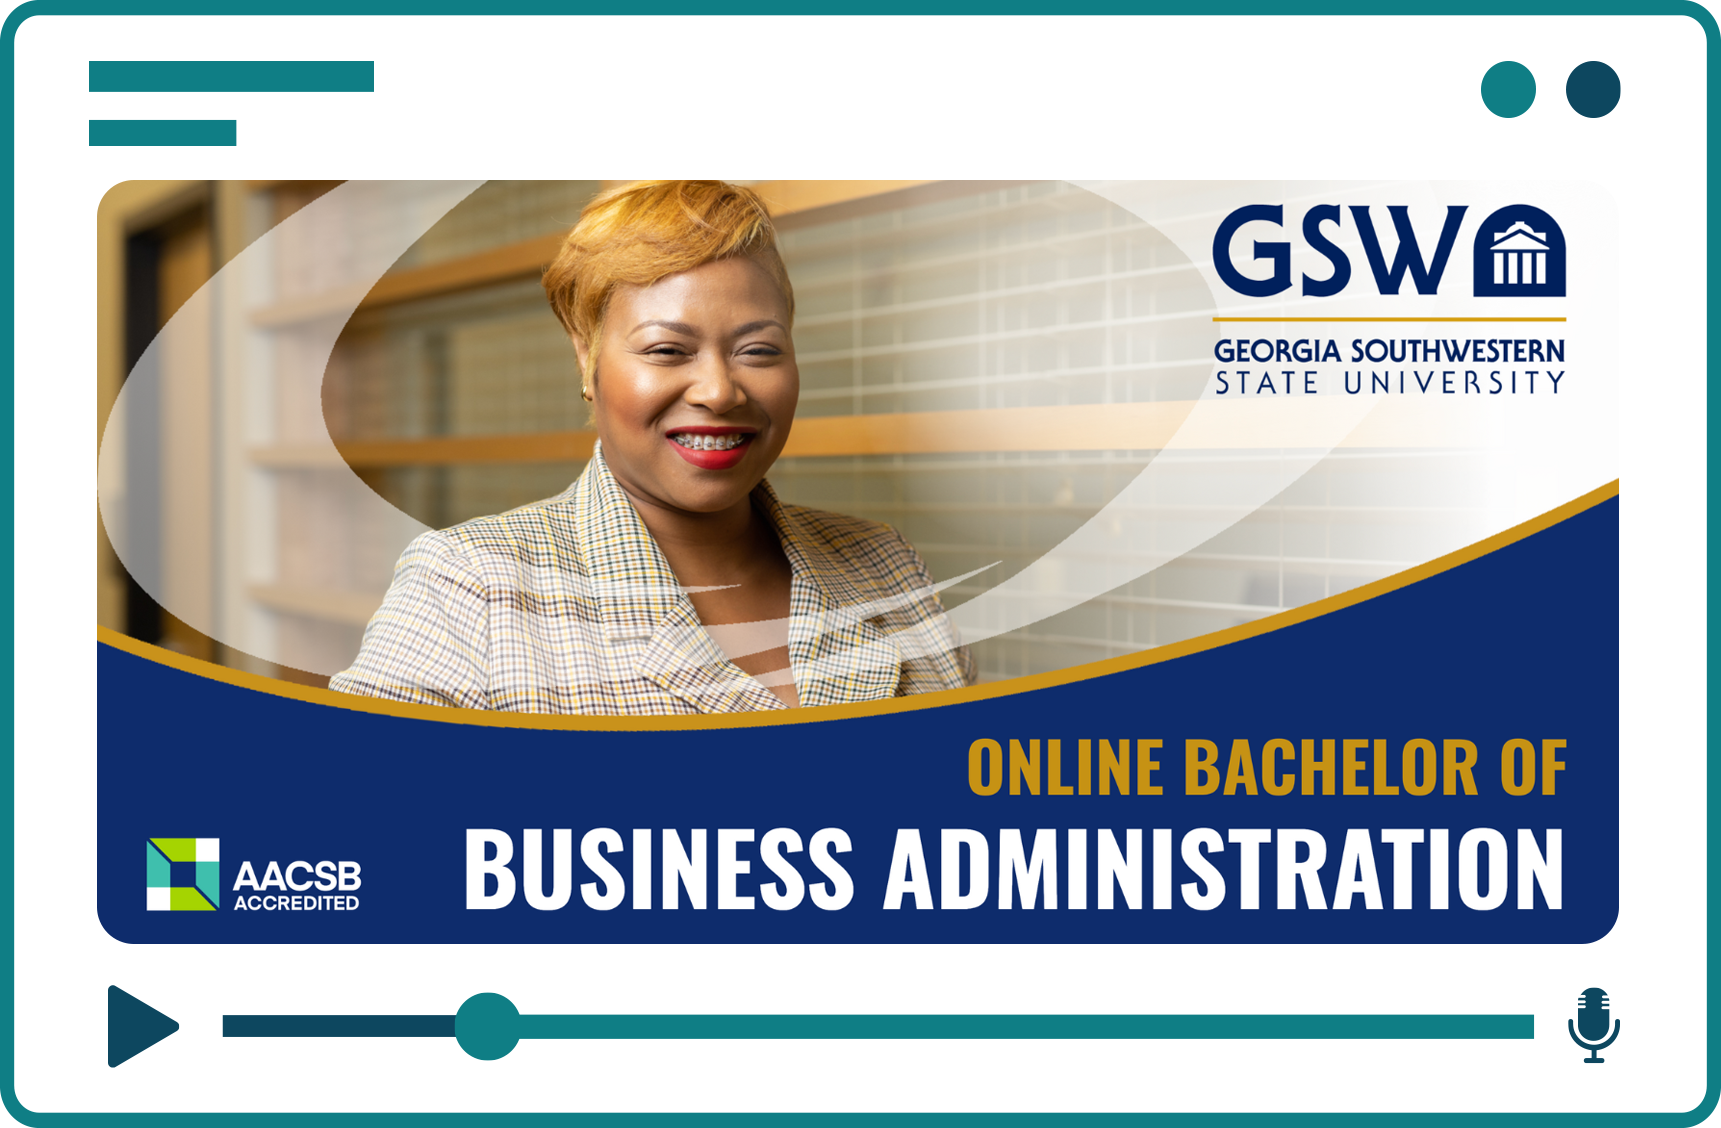 Georgia Southwestern State University ad for an online BBA program, showing a smiling woman, university logos, and an AACSB accreditation notice on a blue and gold design.